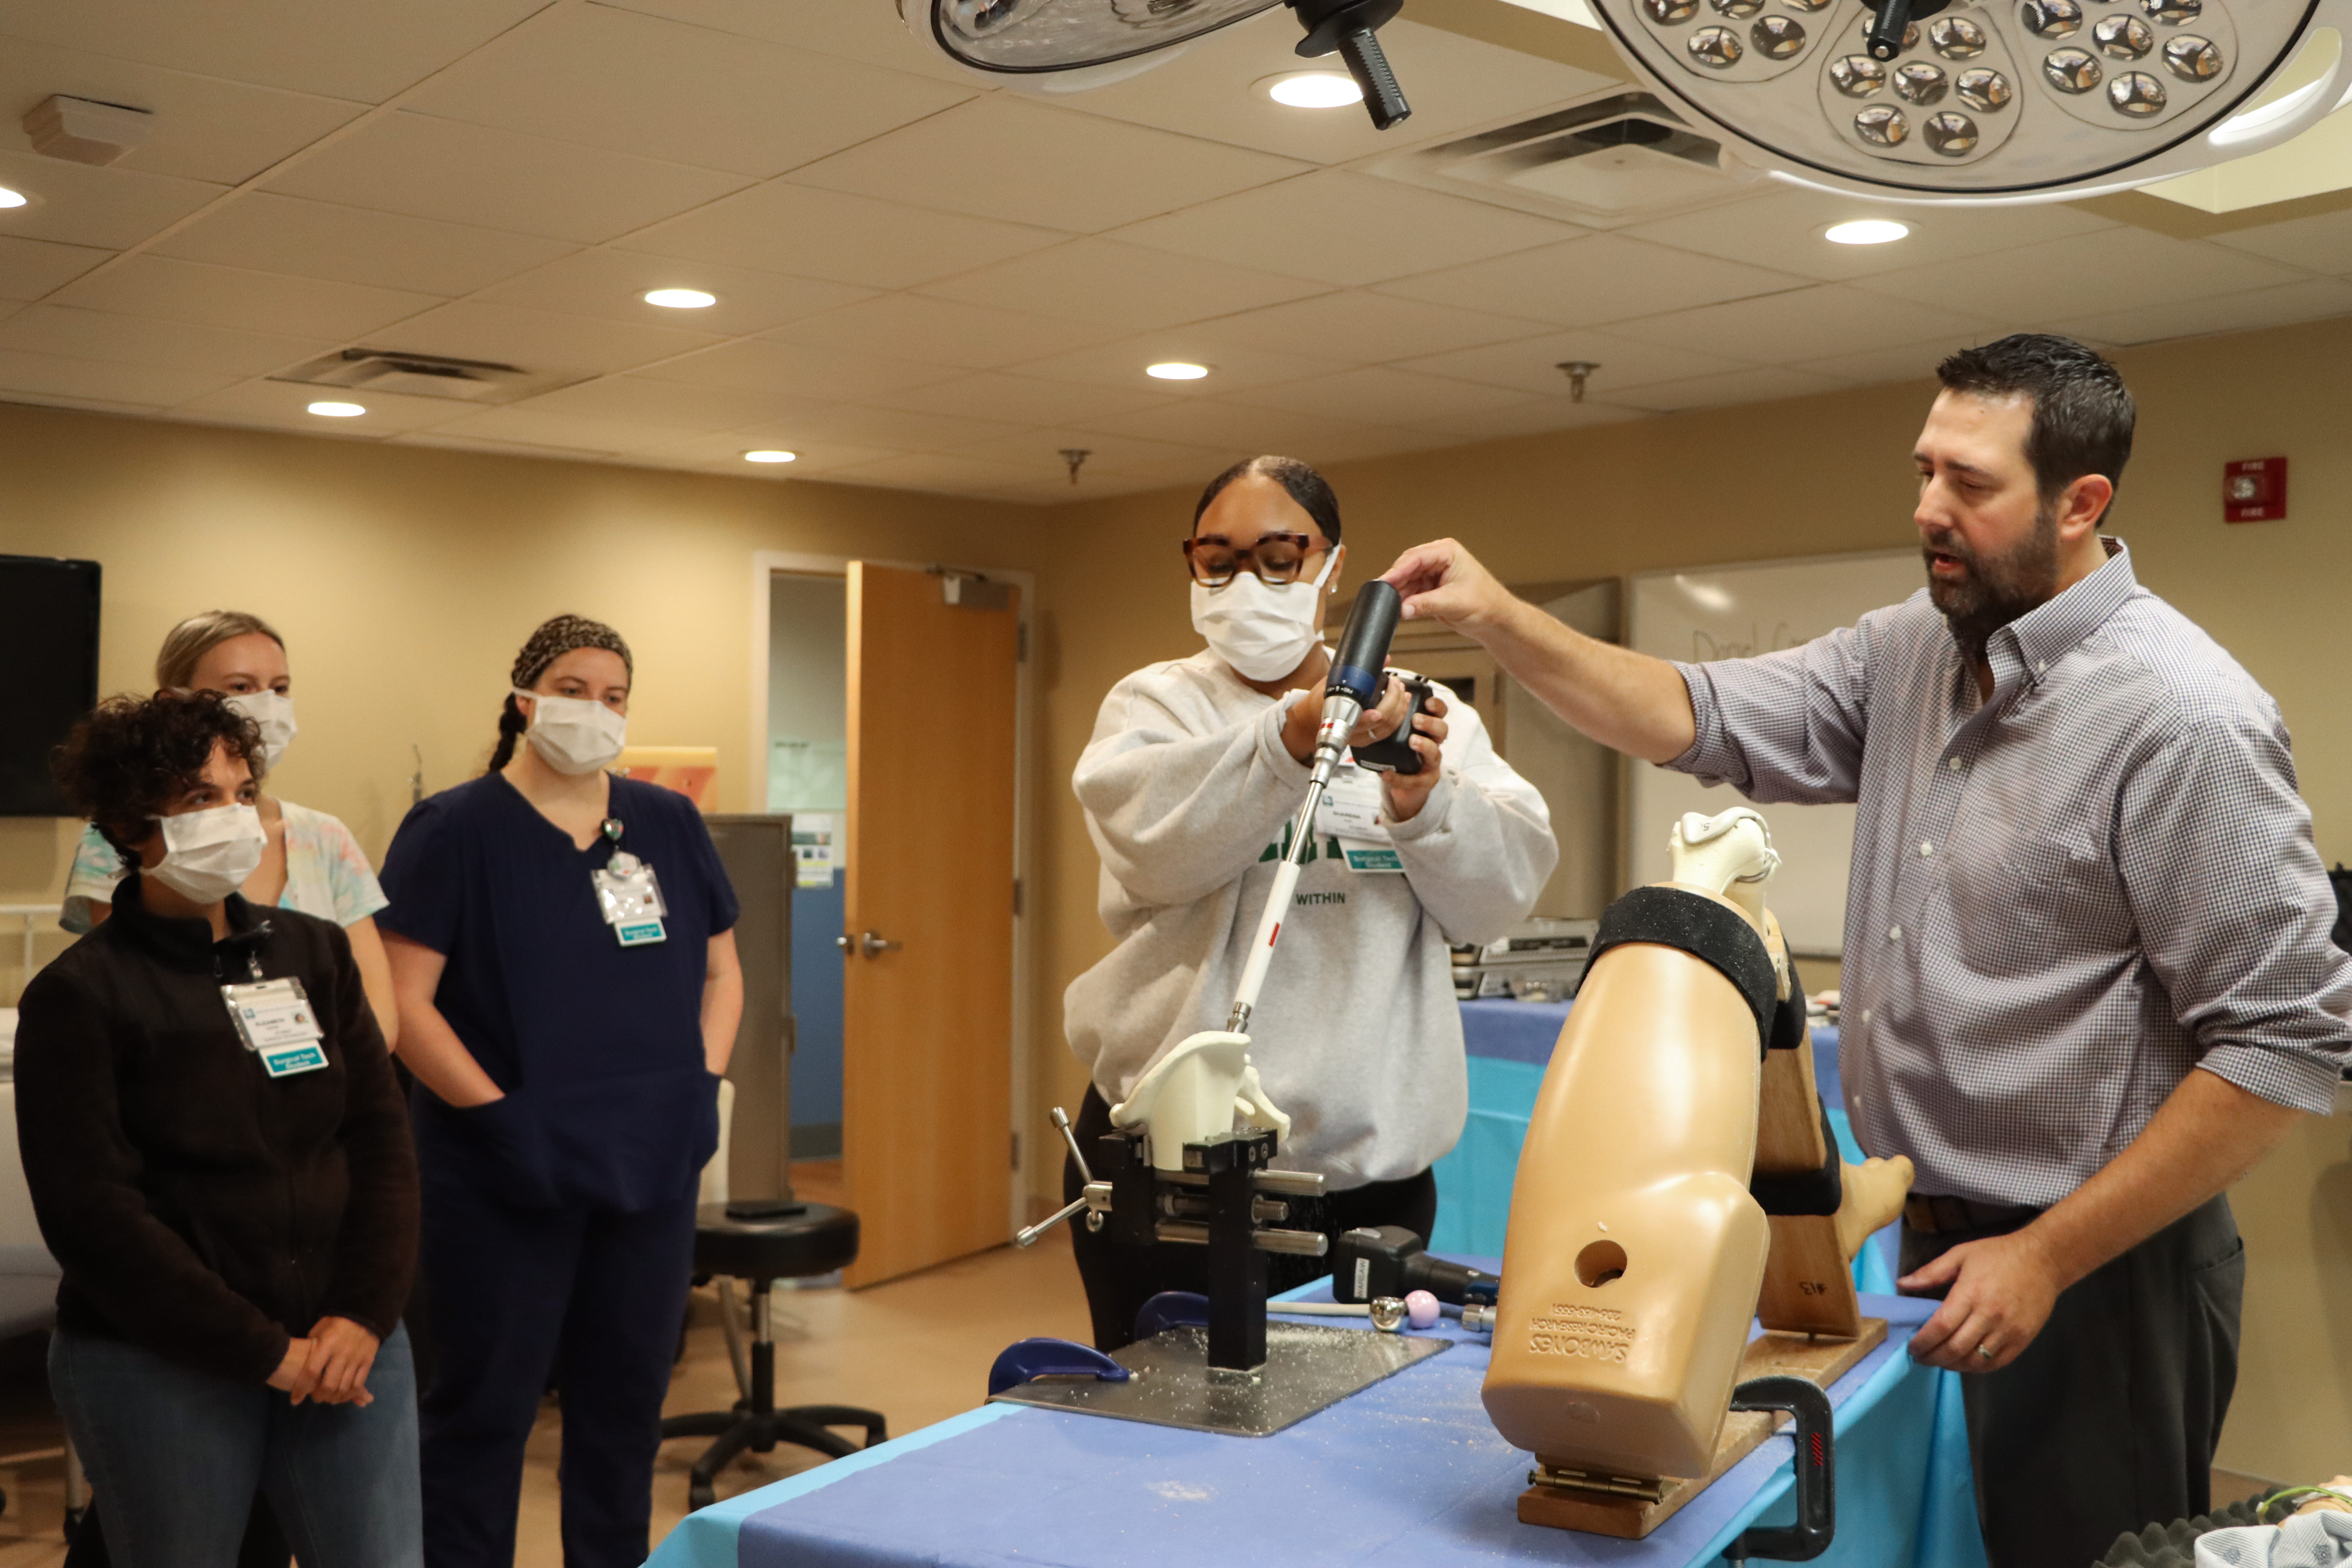 Man presents surgical technology tools to students.